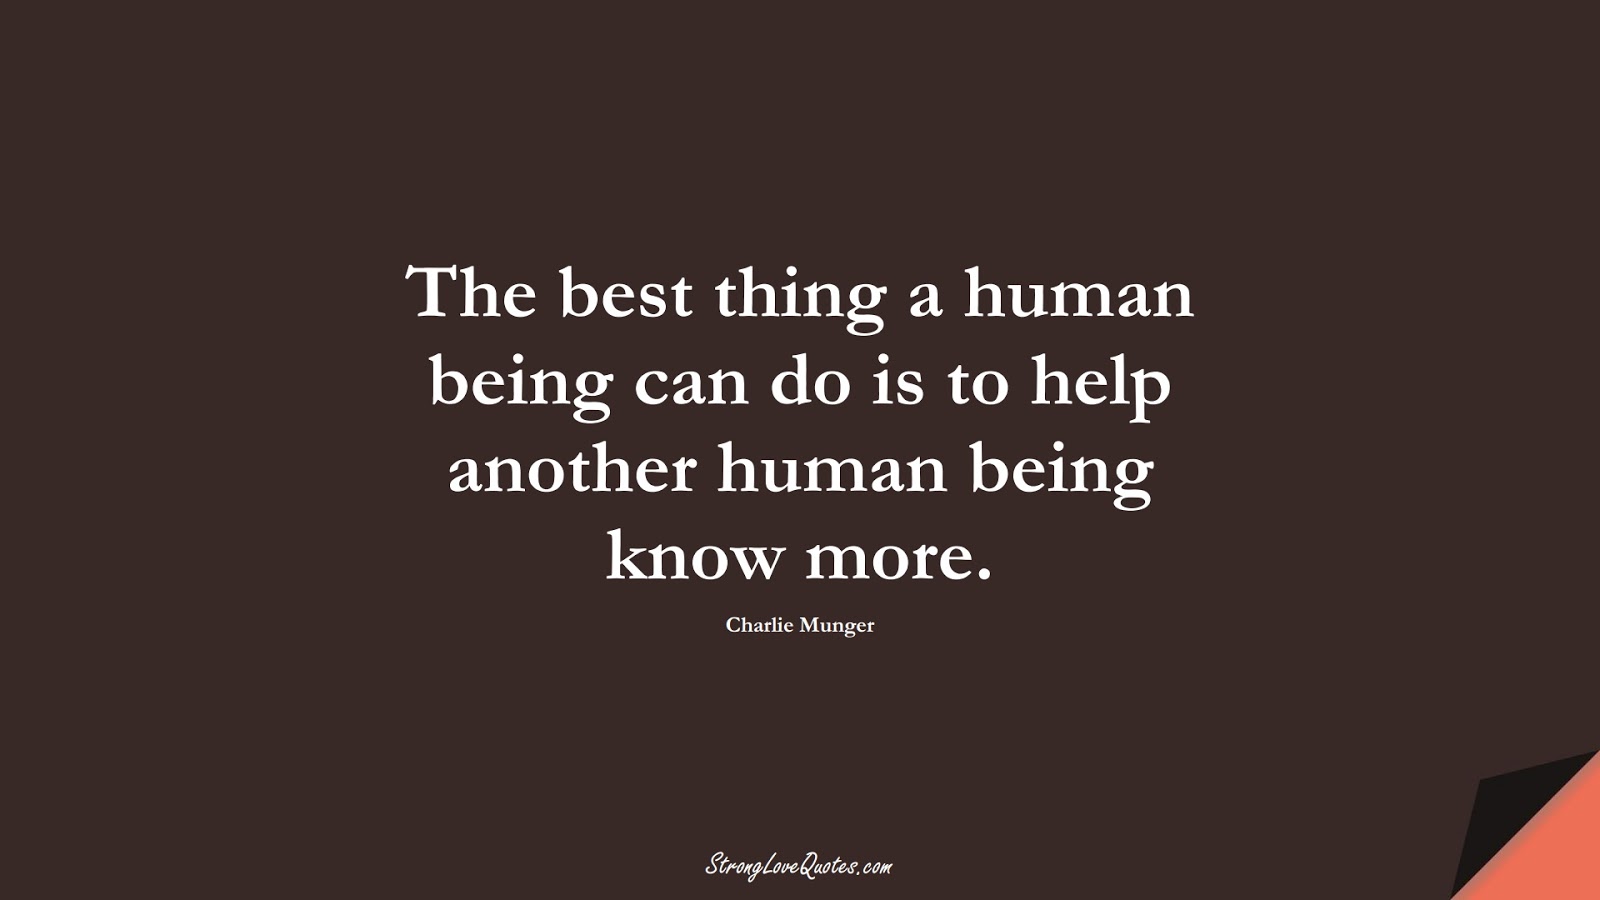 The best thing a human being can do is to help another human being know more. (Charlie Munger);  #KnowledgeQuotes